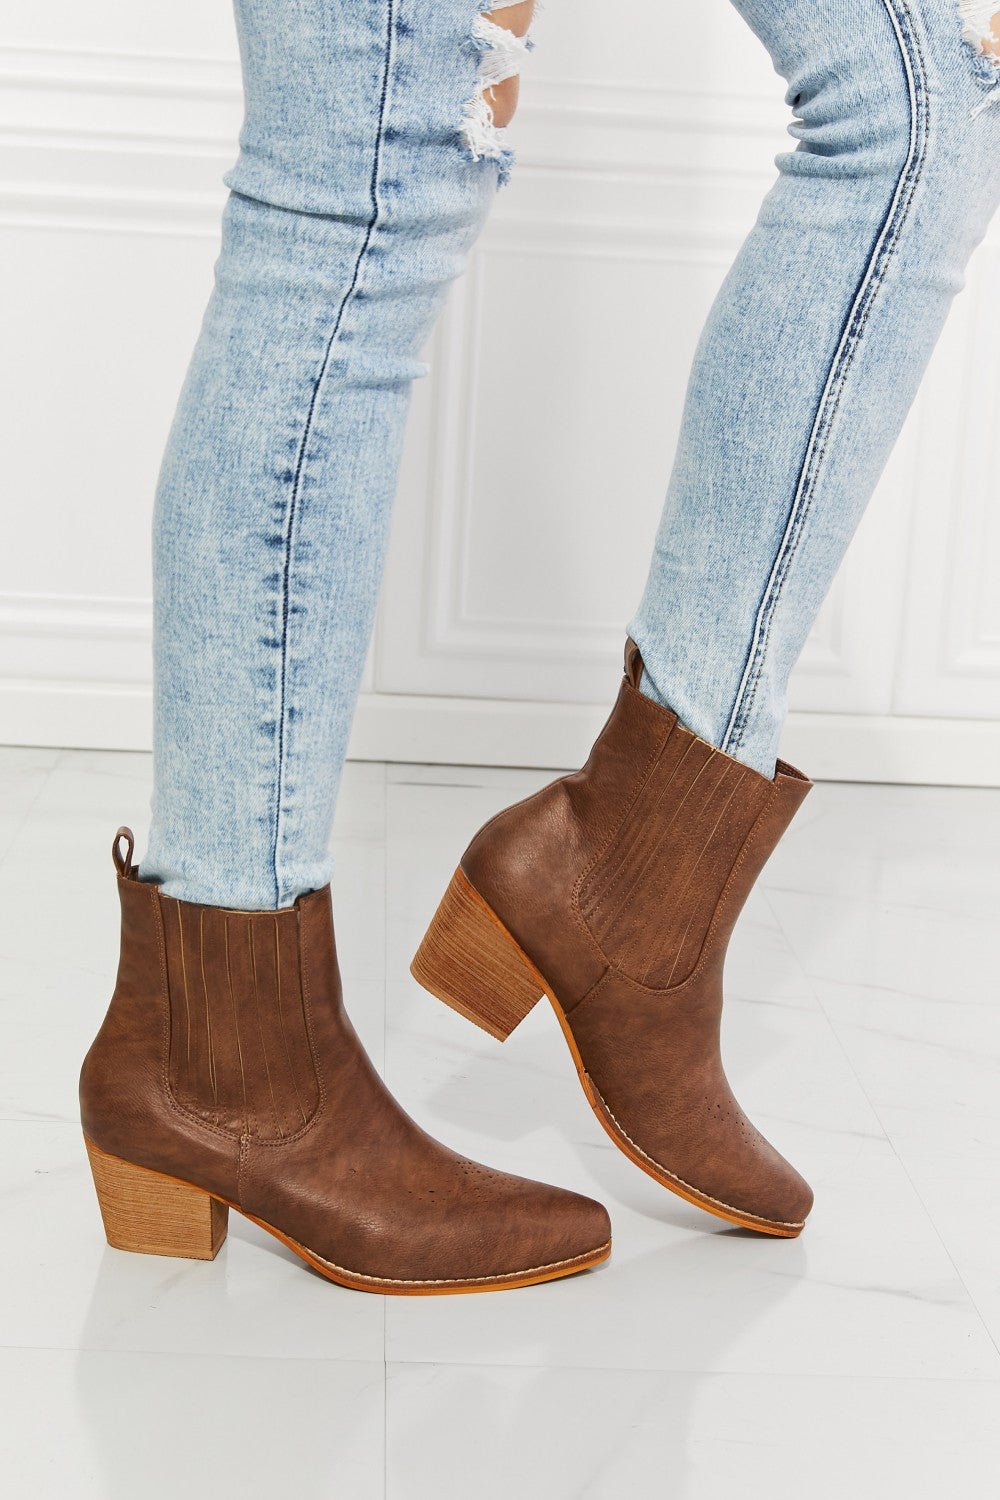 MMShoes Love the Journey Stacked Heel Chelsea Boot in Chestnut - Kinsley & Harlow